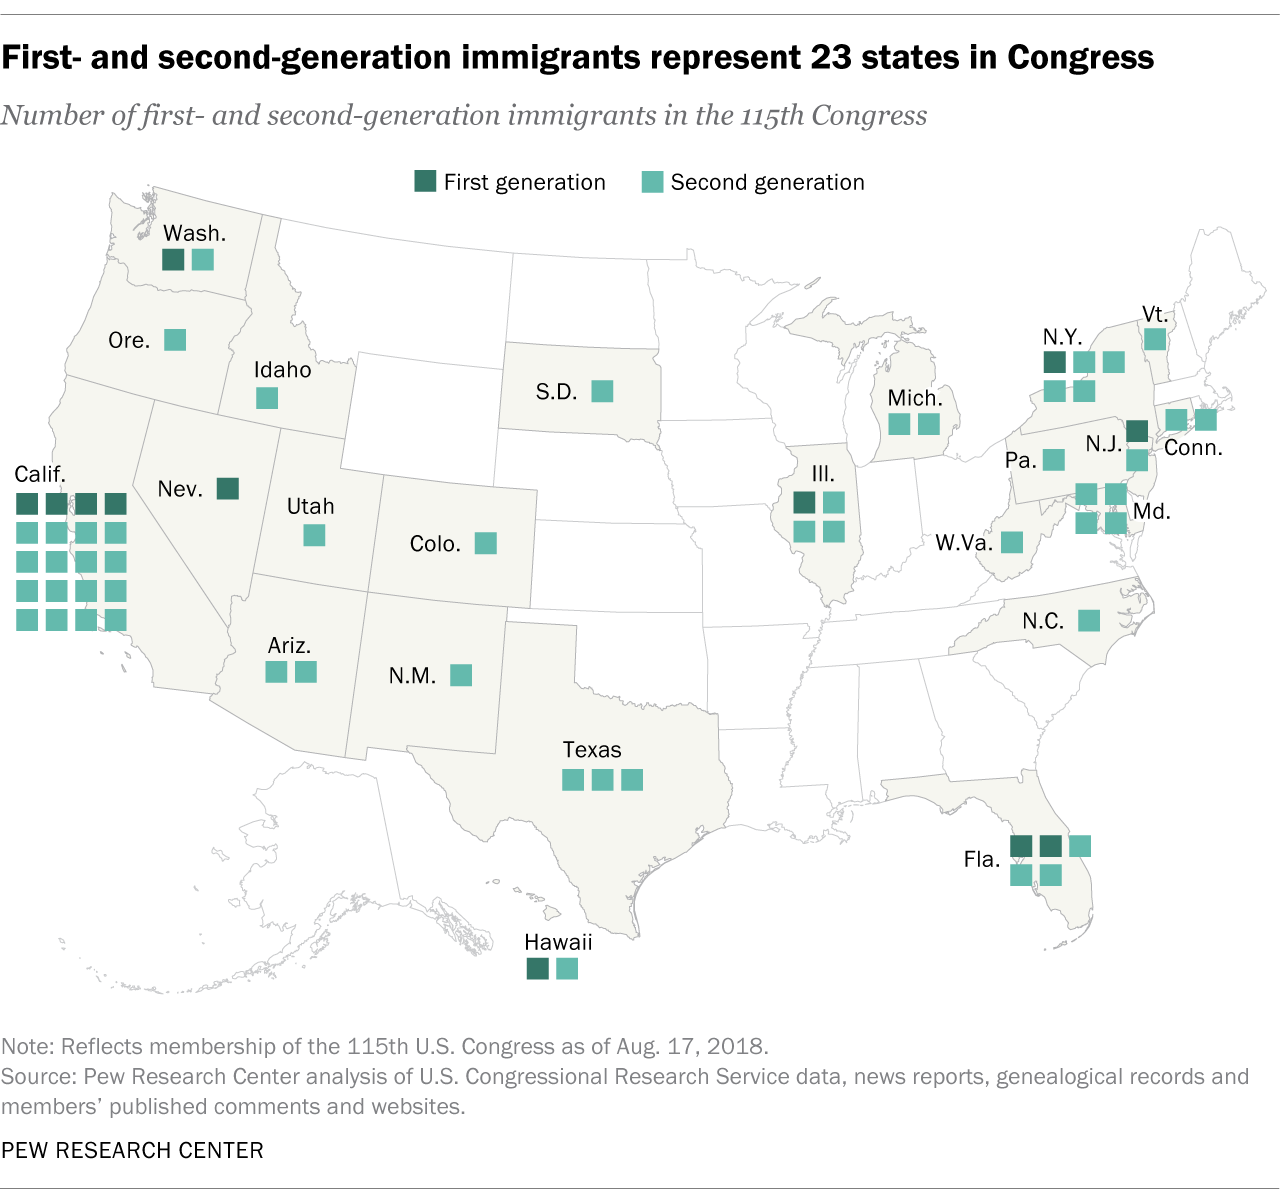 First- and second-generation immigrants represent 23 states in Congress